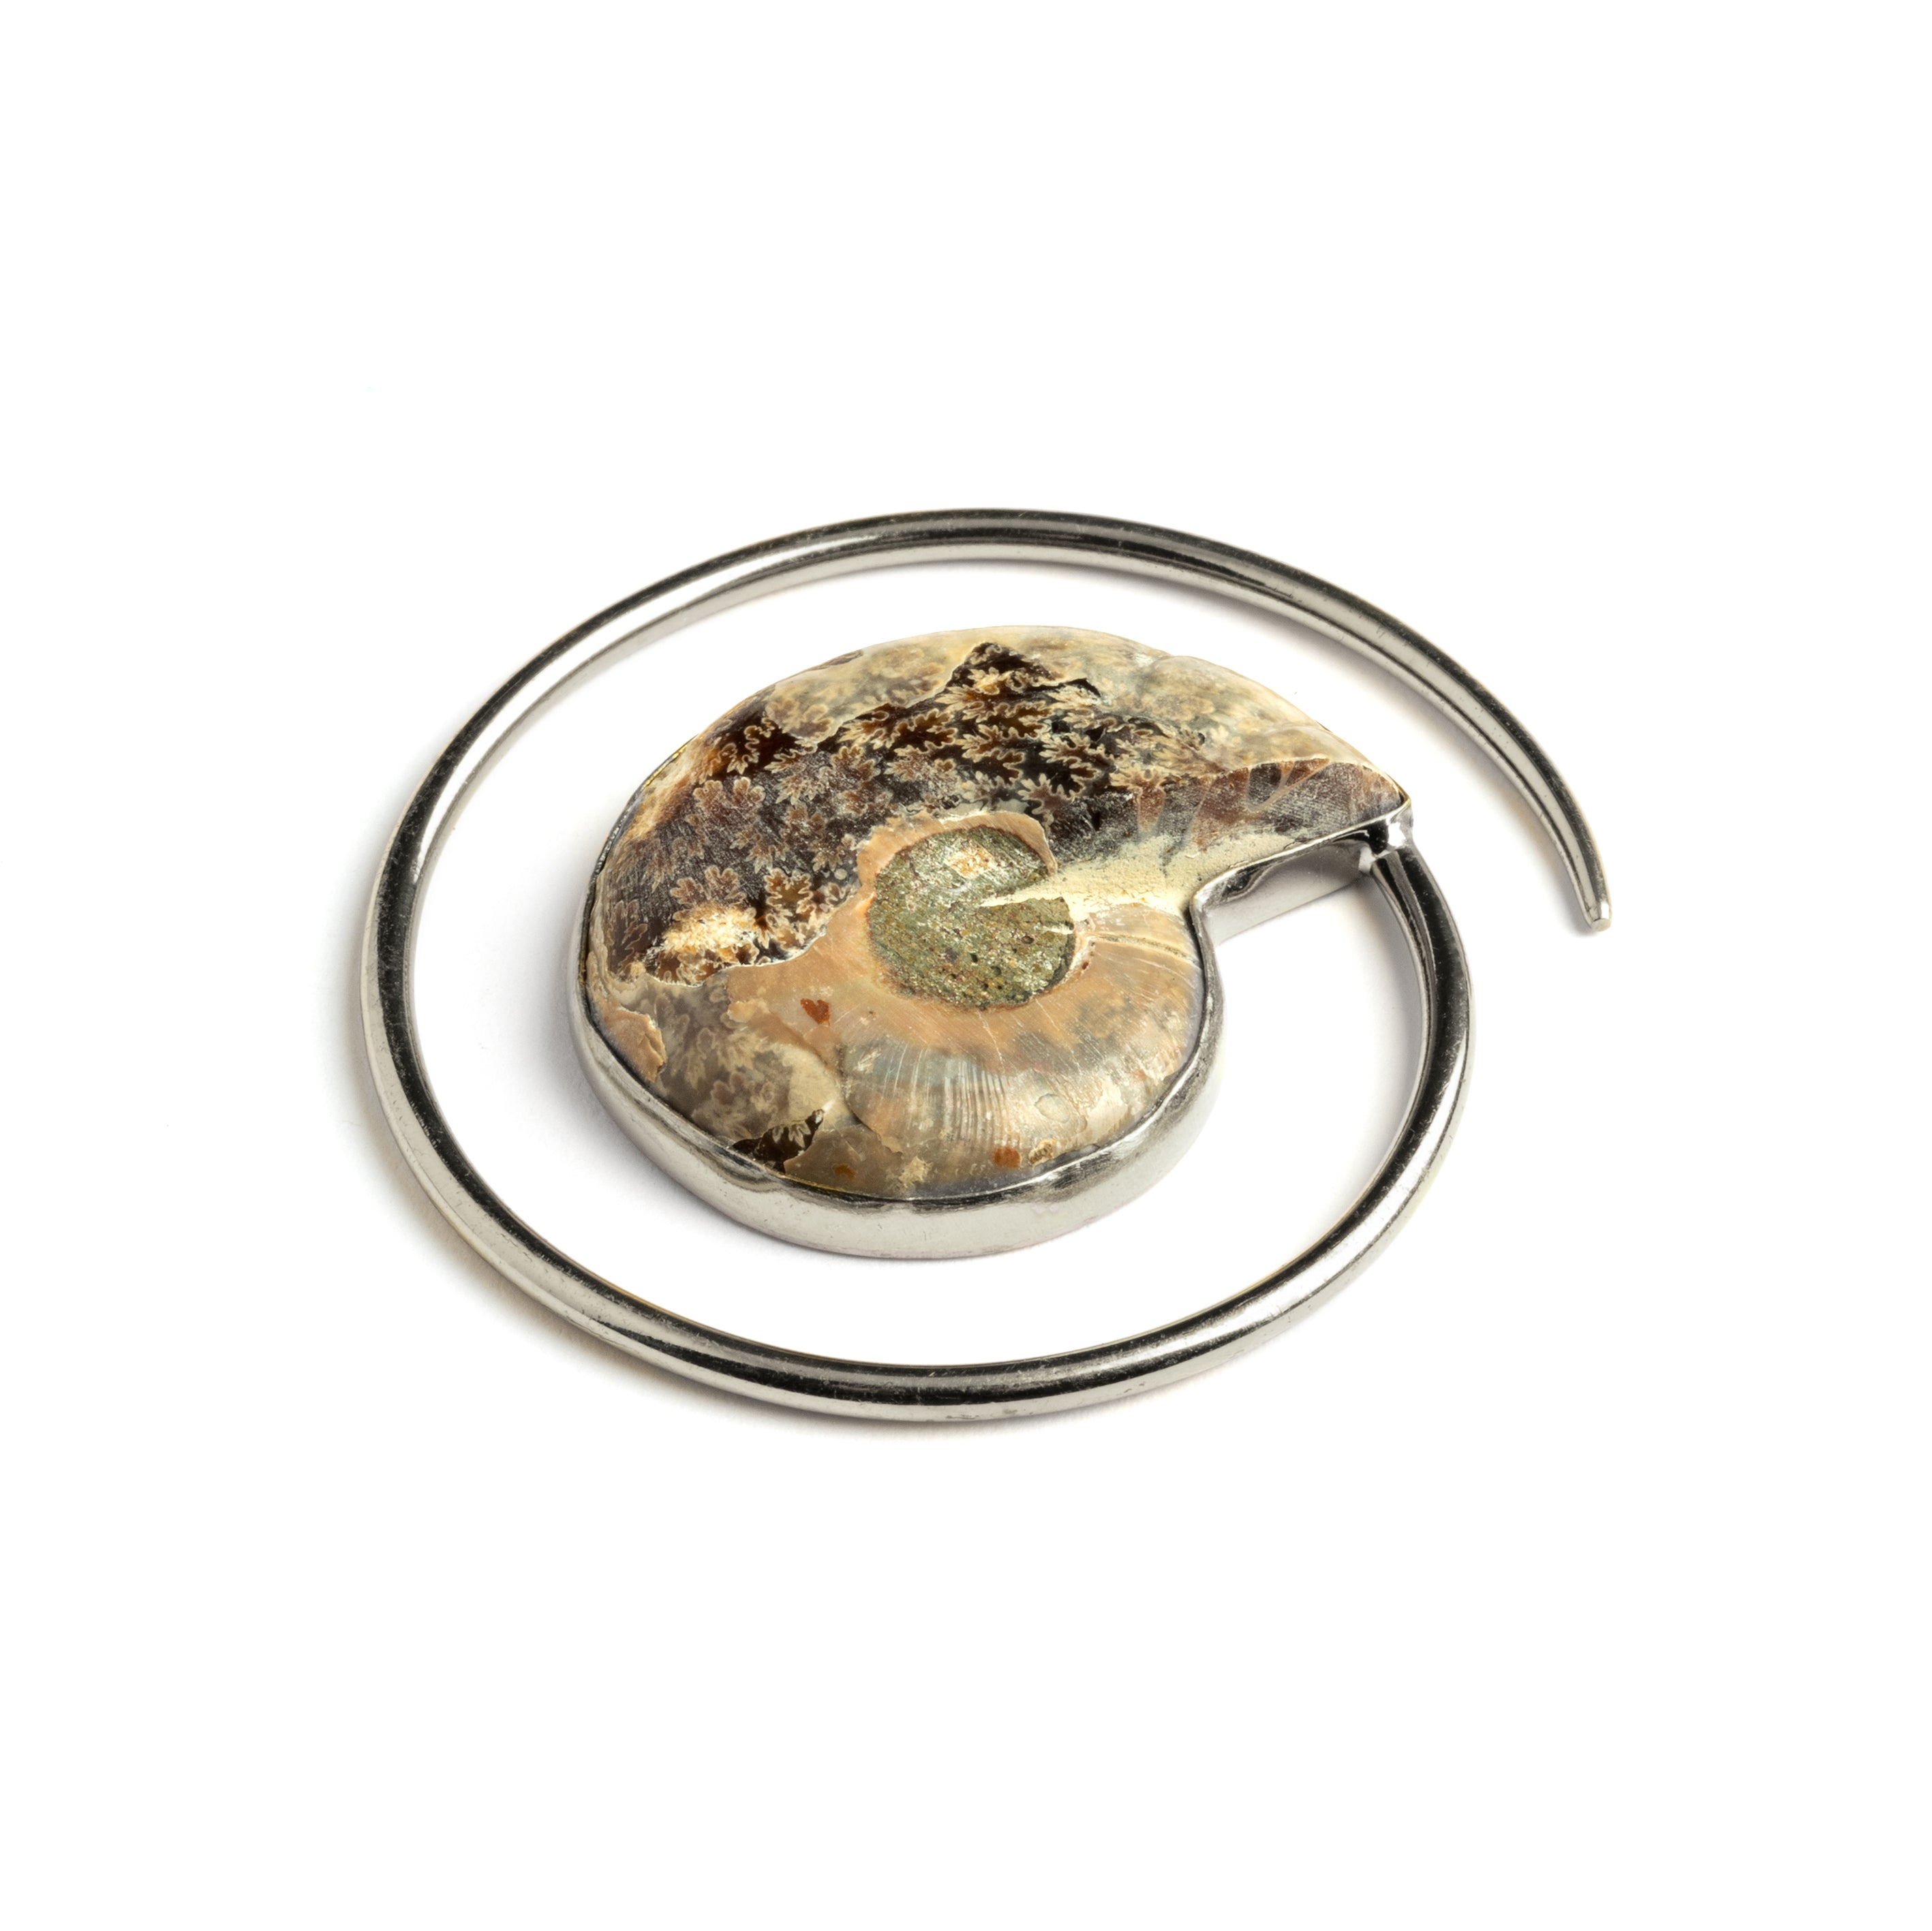 single silver spiral ear weight hanger with Ammonite fossil back view